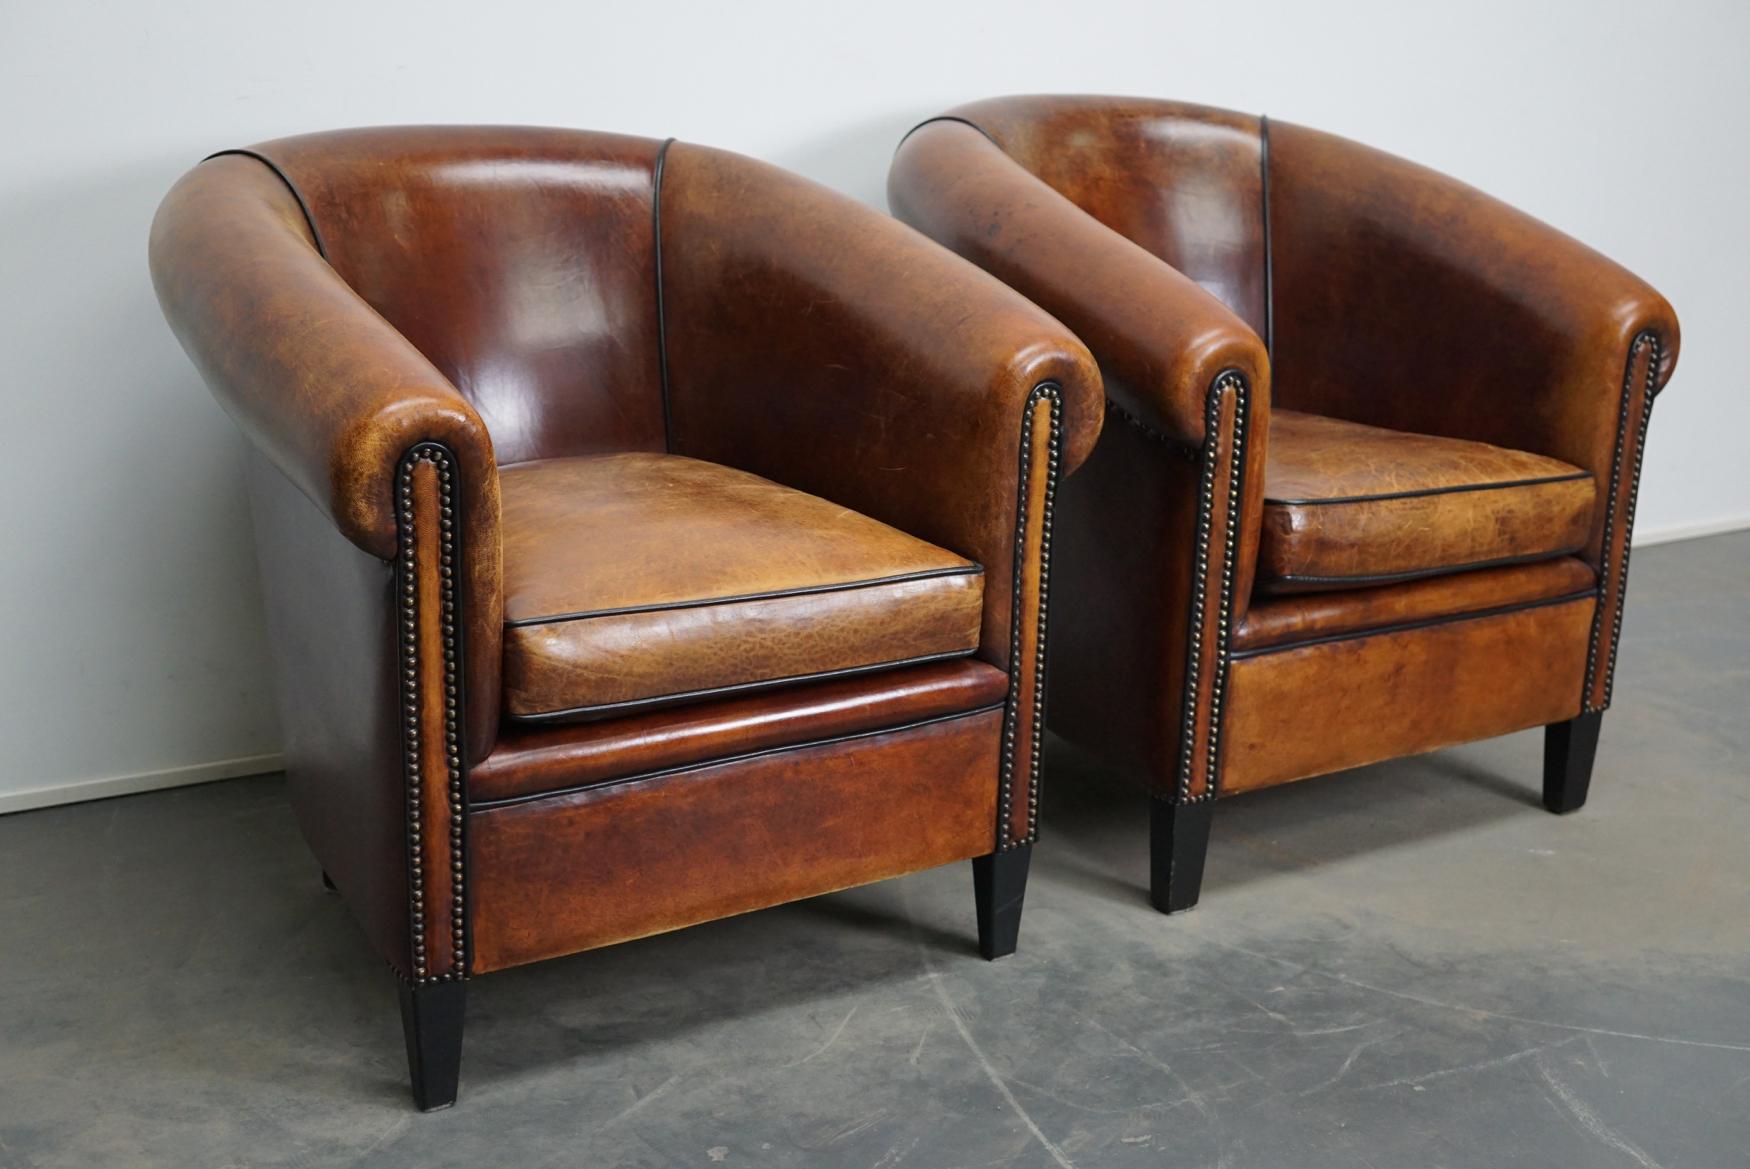 Vintage Dutch Cognac Leather Club Chairs, Set of 2 with Hocker 1